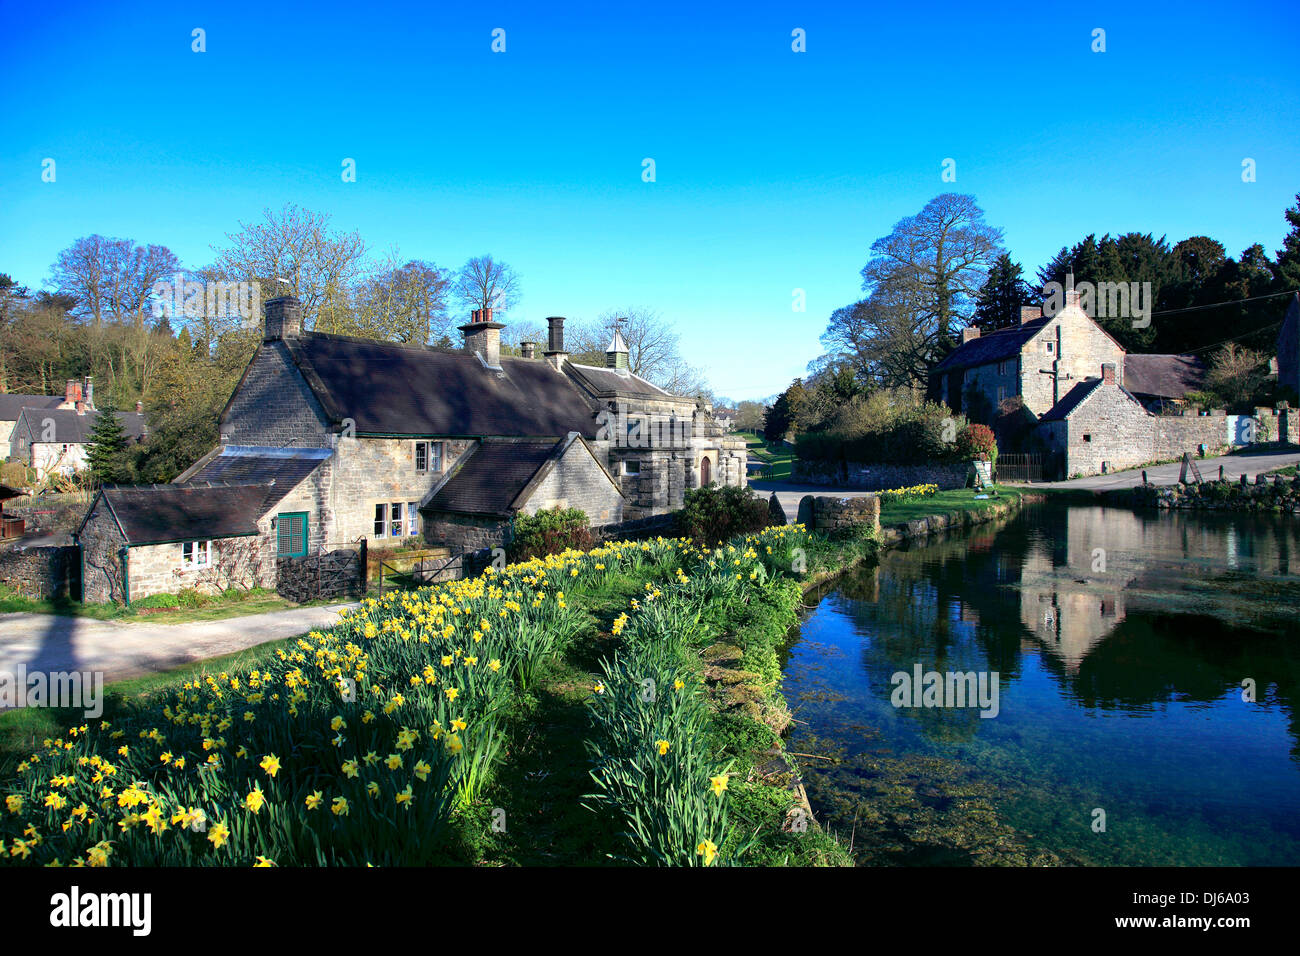 Spring Daffodils by the village green and pond at Tissington village, Peak District National Park, Derbyshire, England, UK. Stock Photo